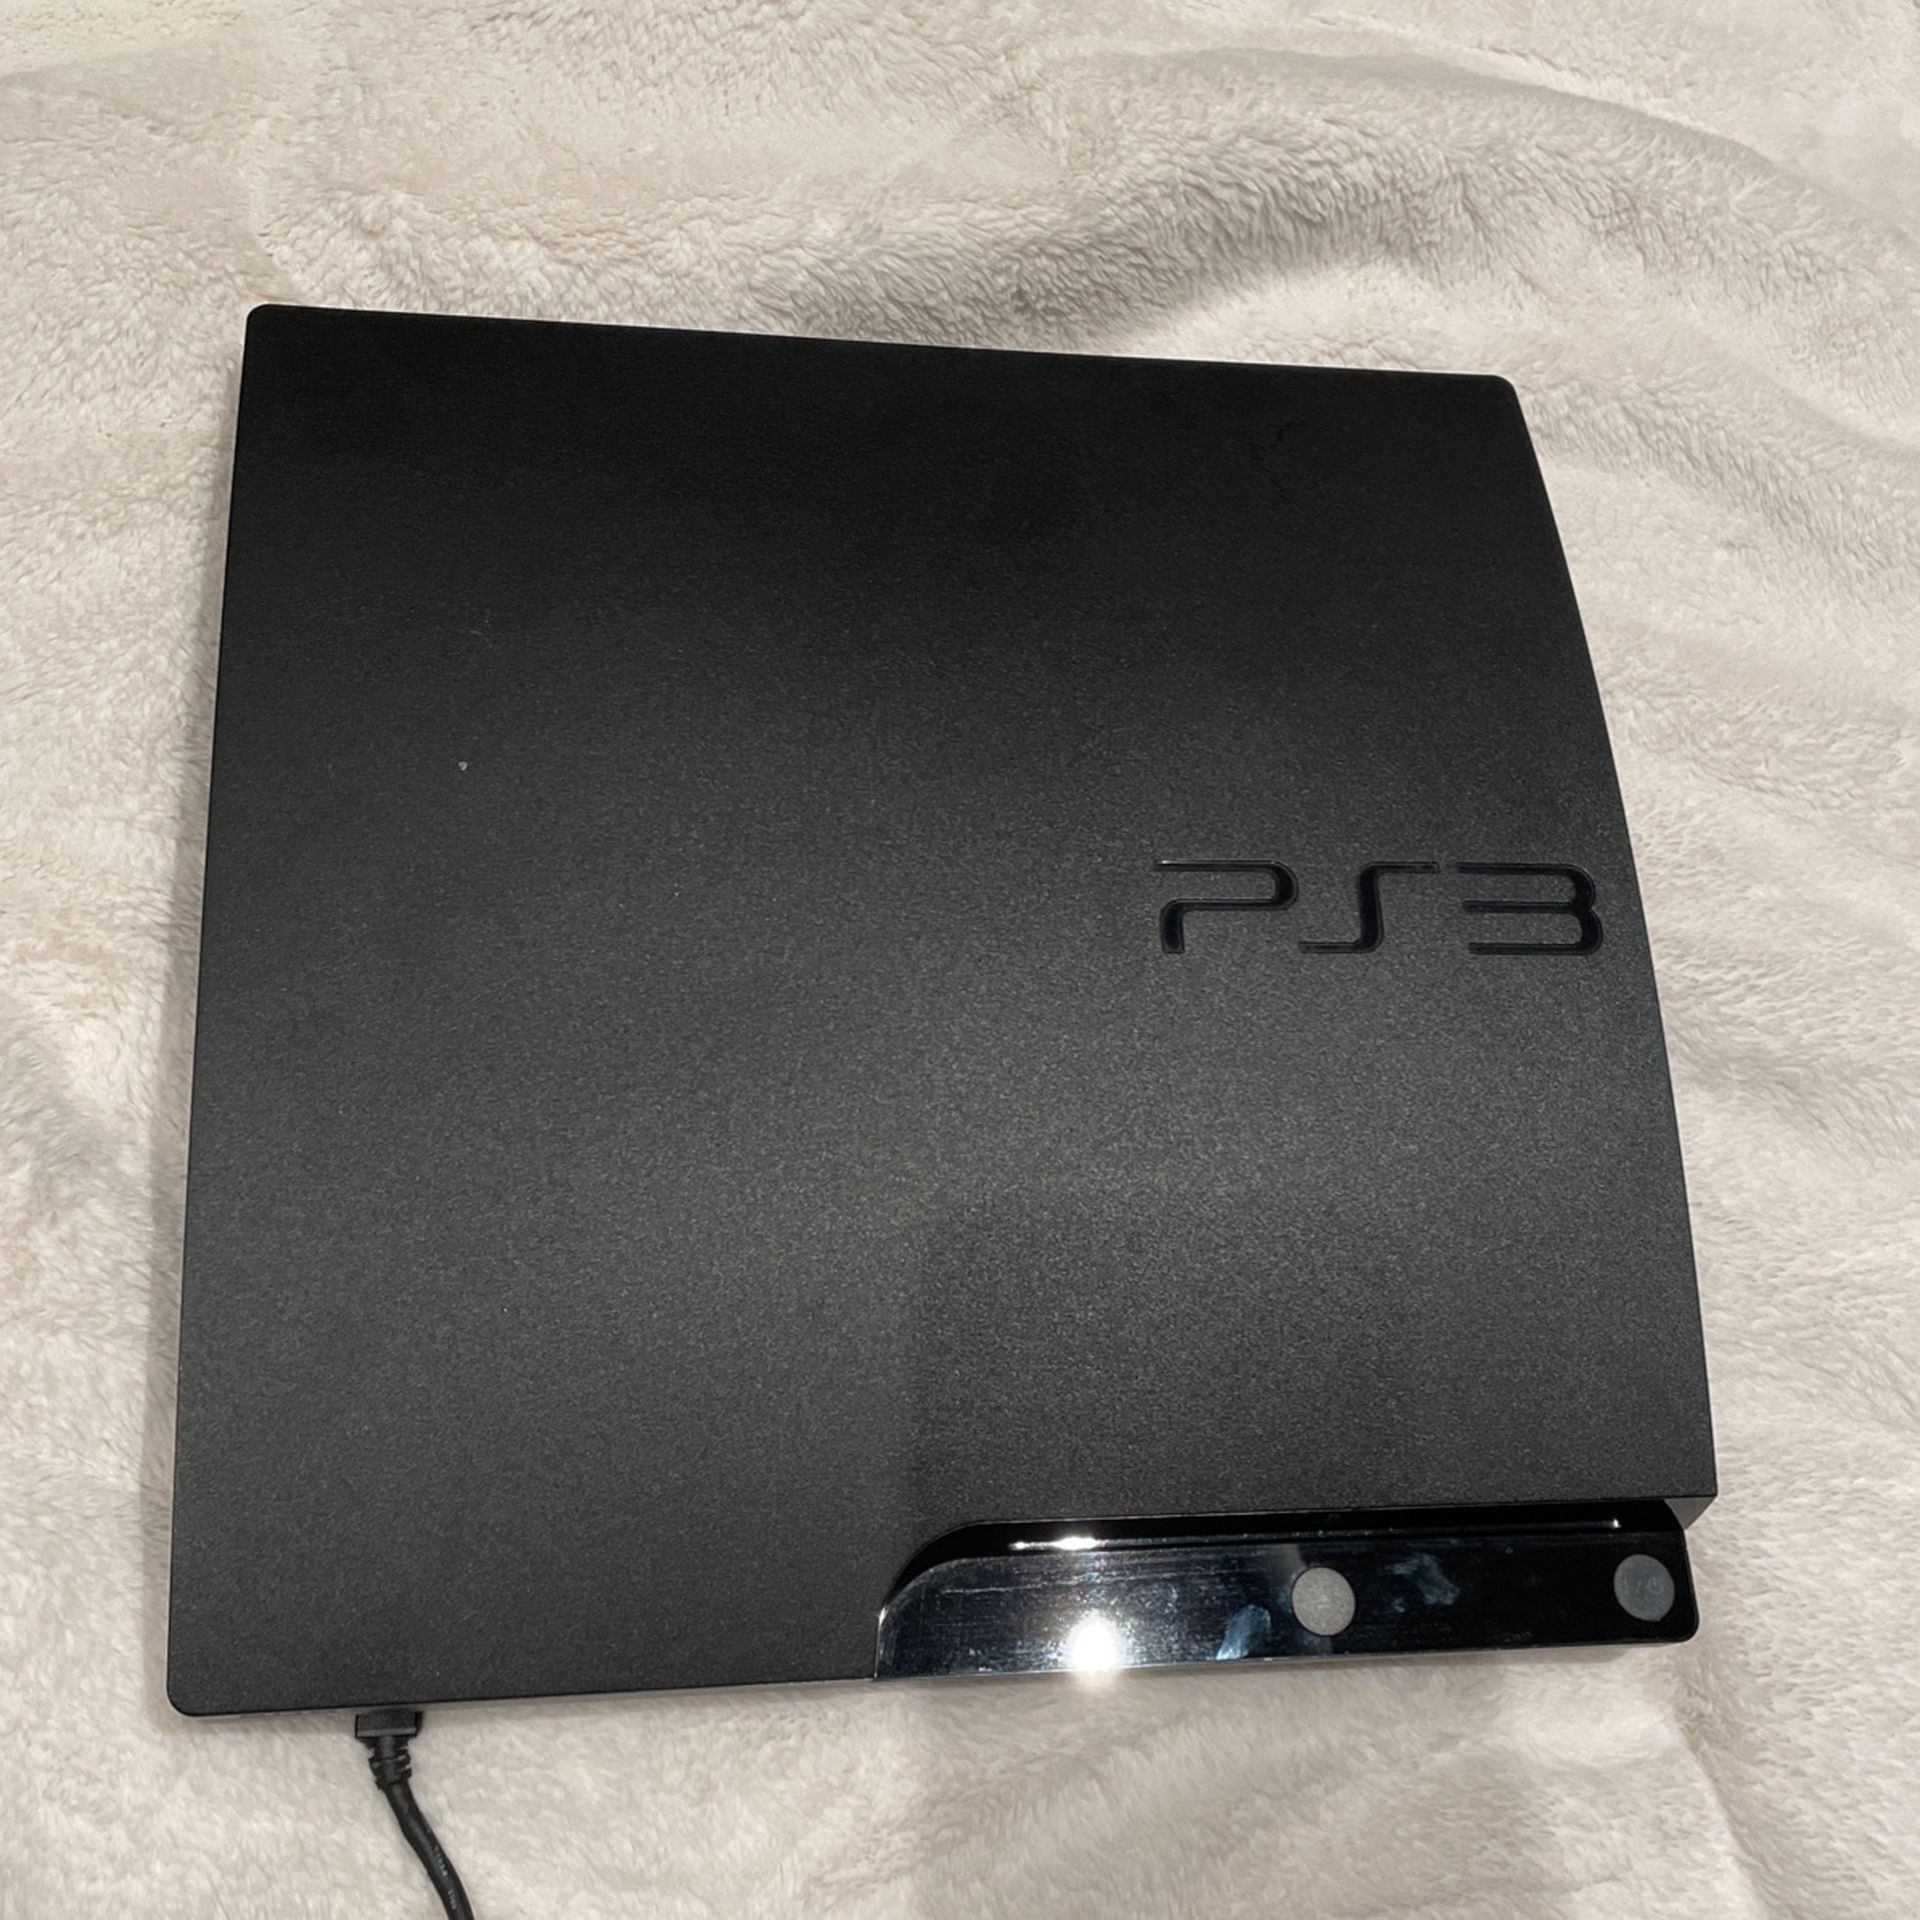 Ps3 With Controller,hdmi, And Power Cable